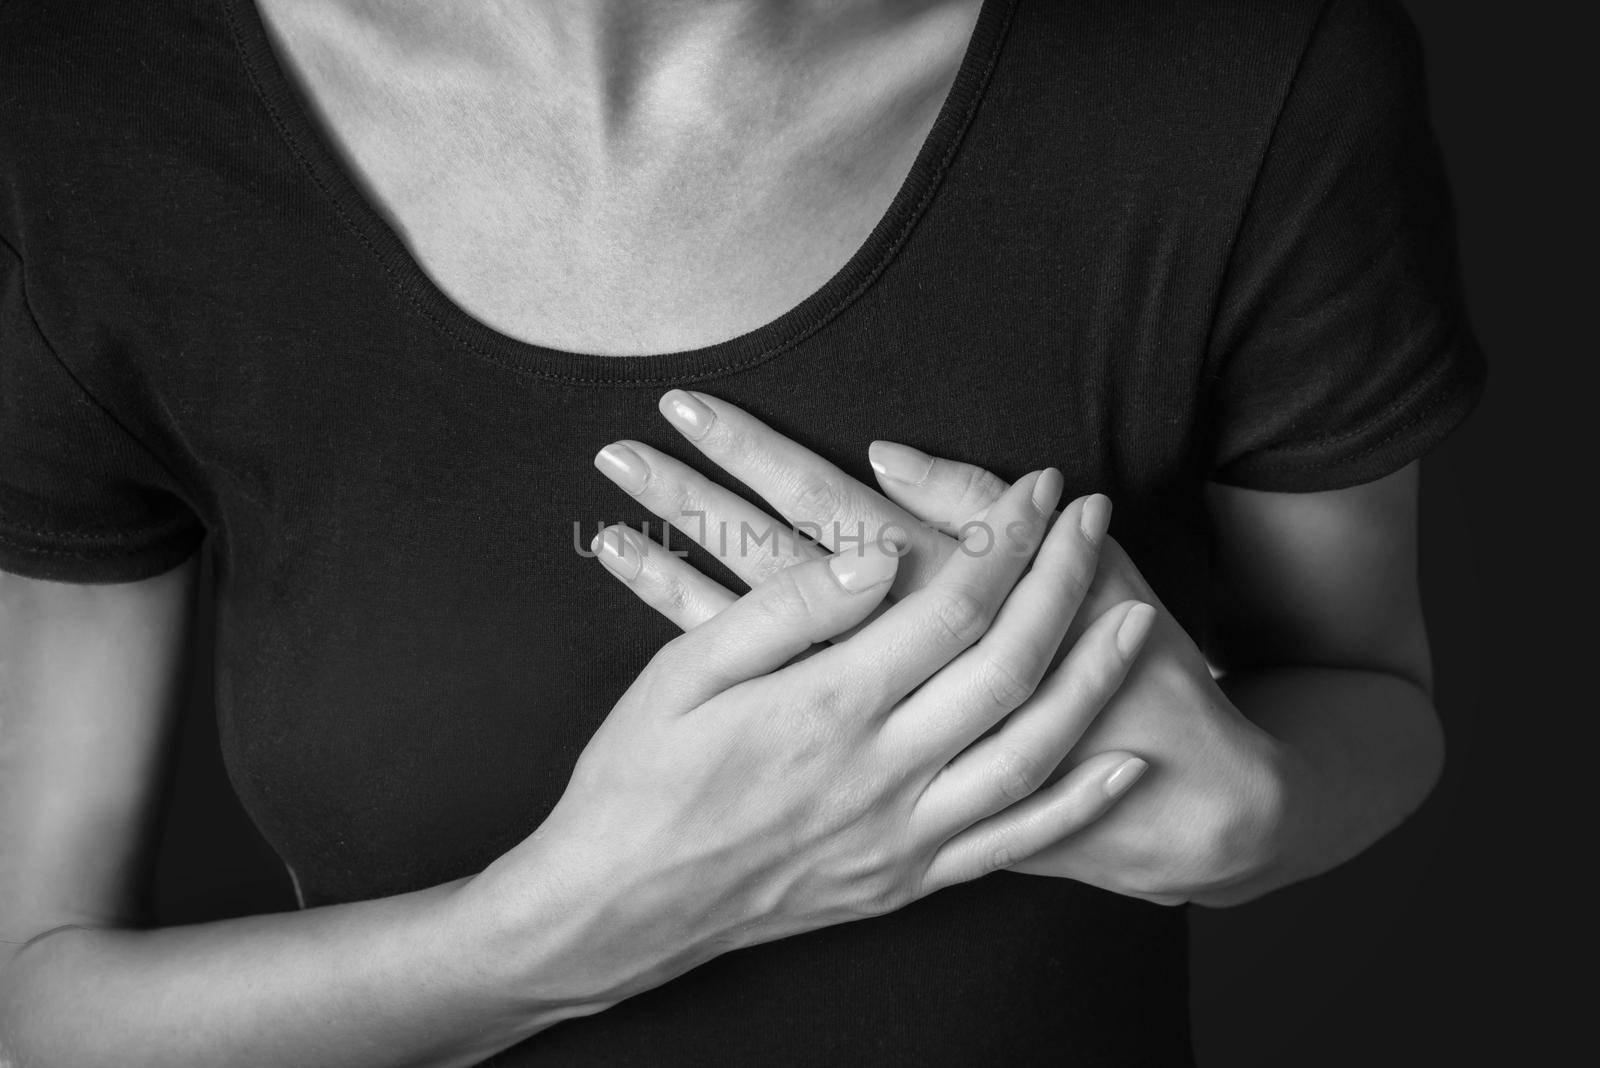 Woman is clutching her chest, acute pain possible heart attack, monochrome image